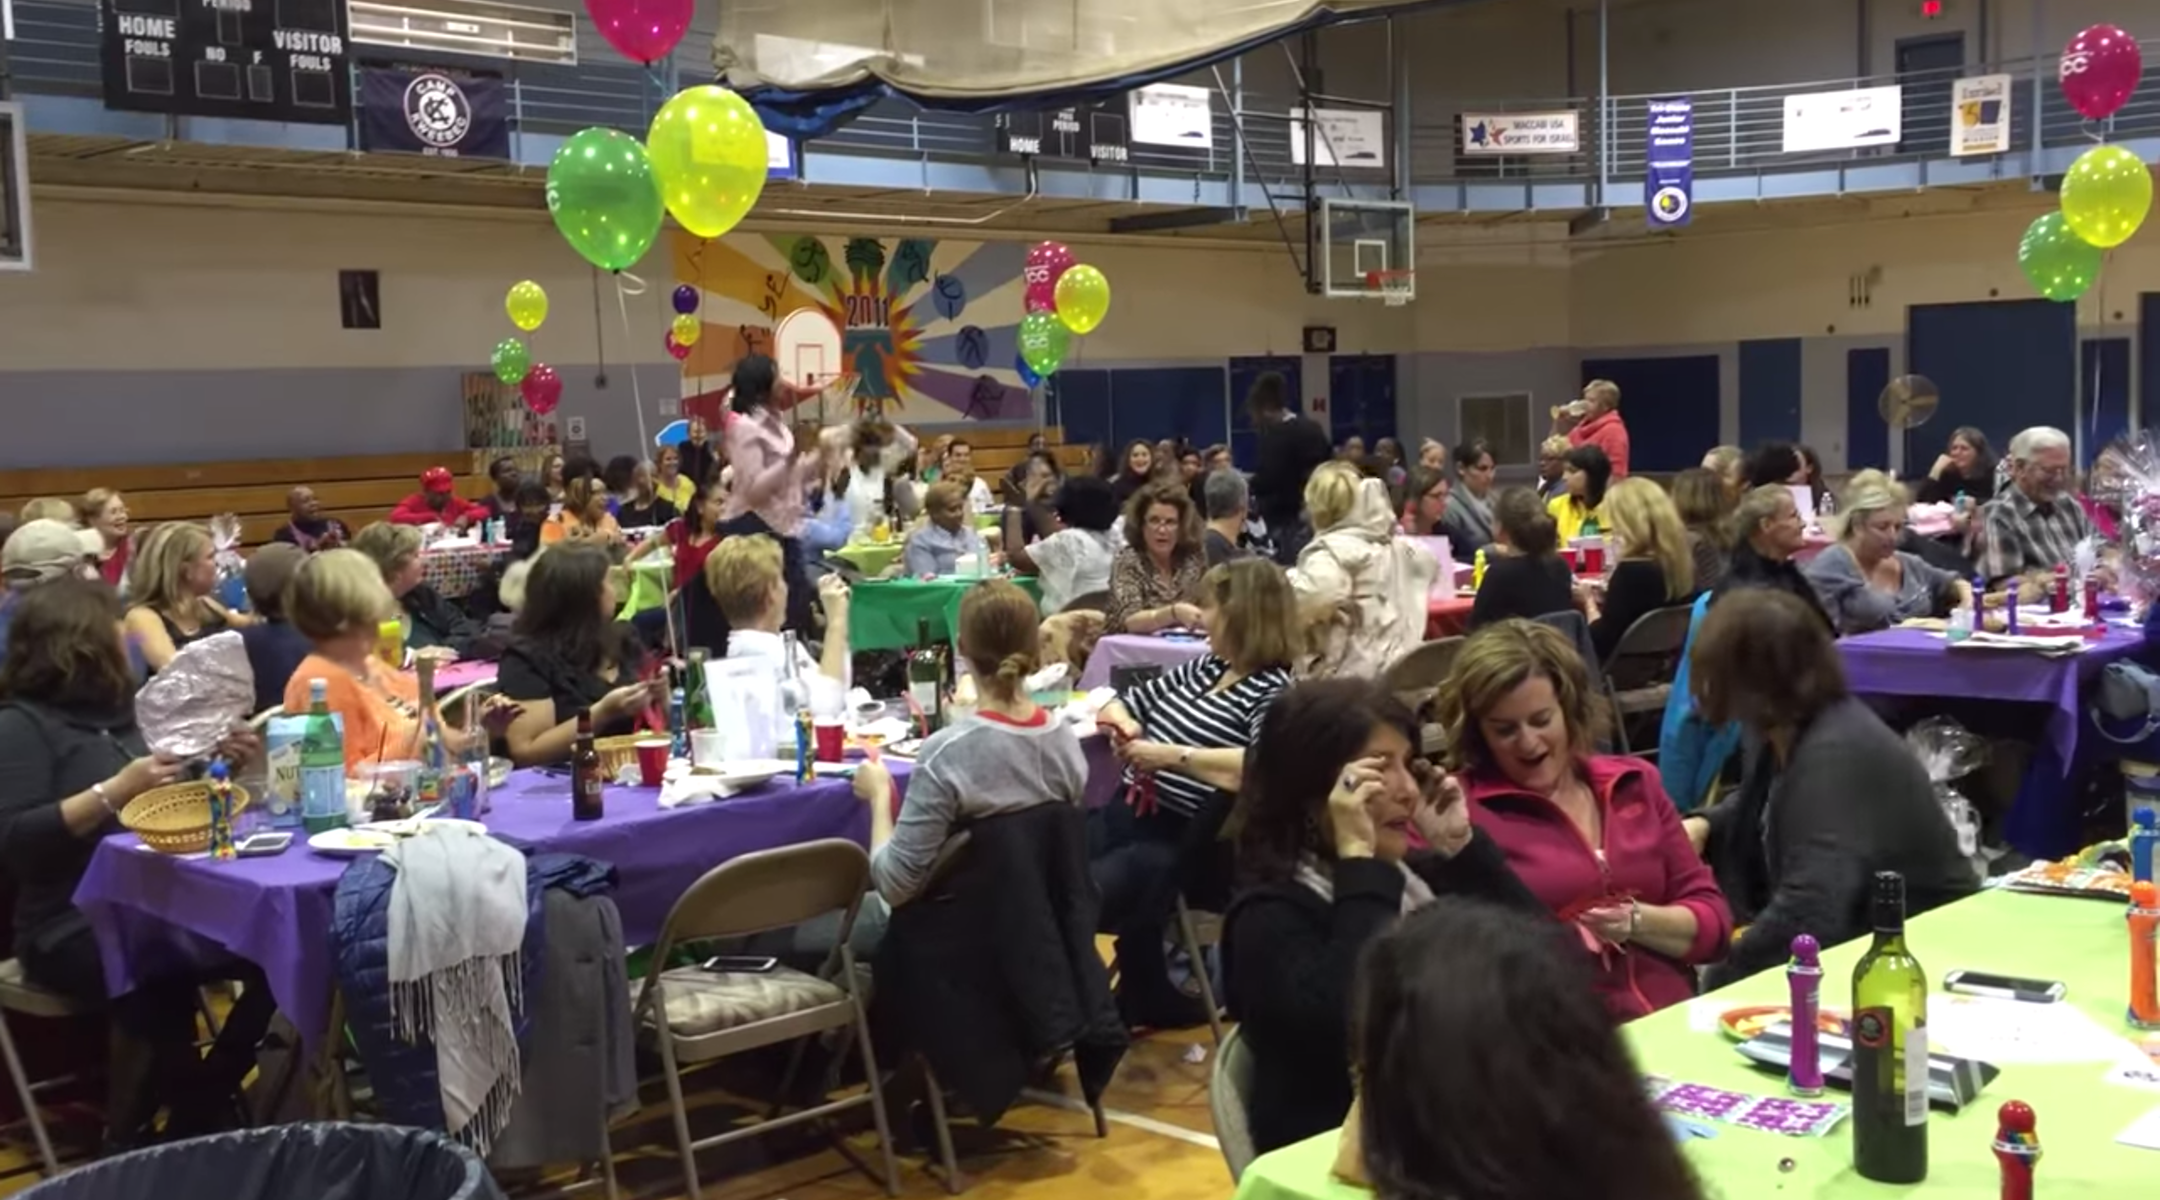 A bingo game at the Kaiserman JCC outside Philadelphia in 2015. This week, nearly all of its employees were laid off due to the coronavirus. (Screenshot from YouTube)